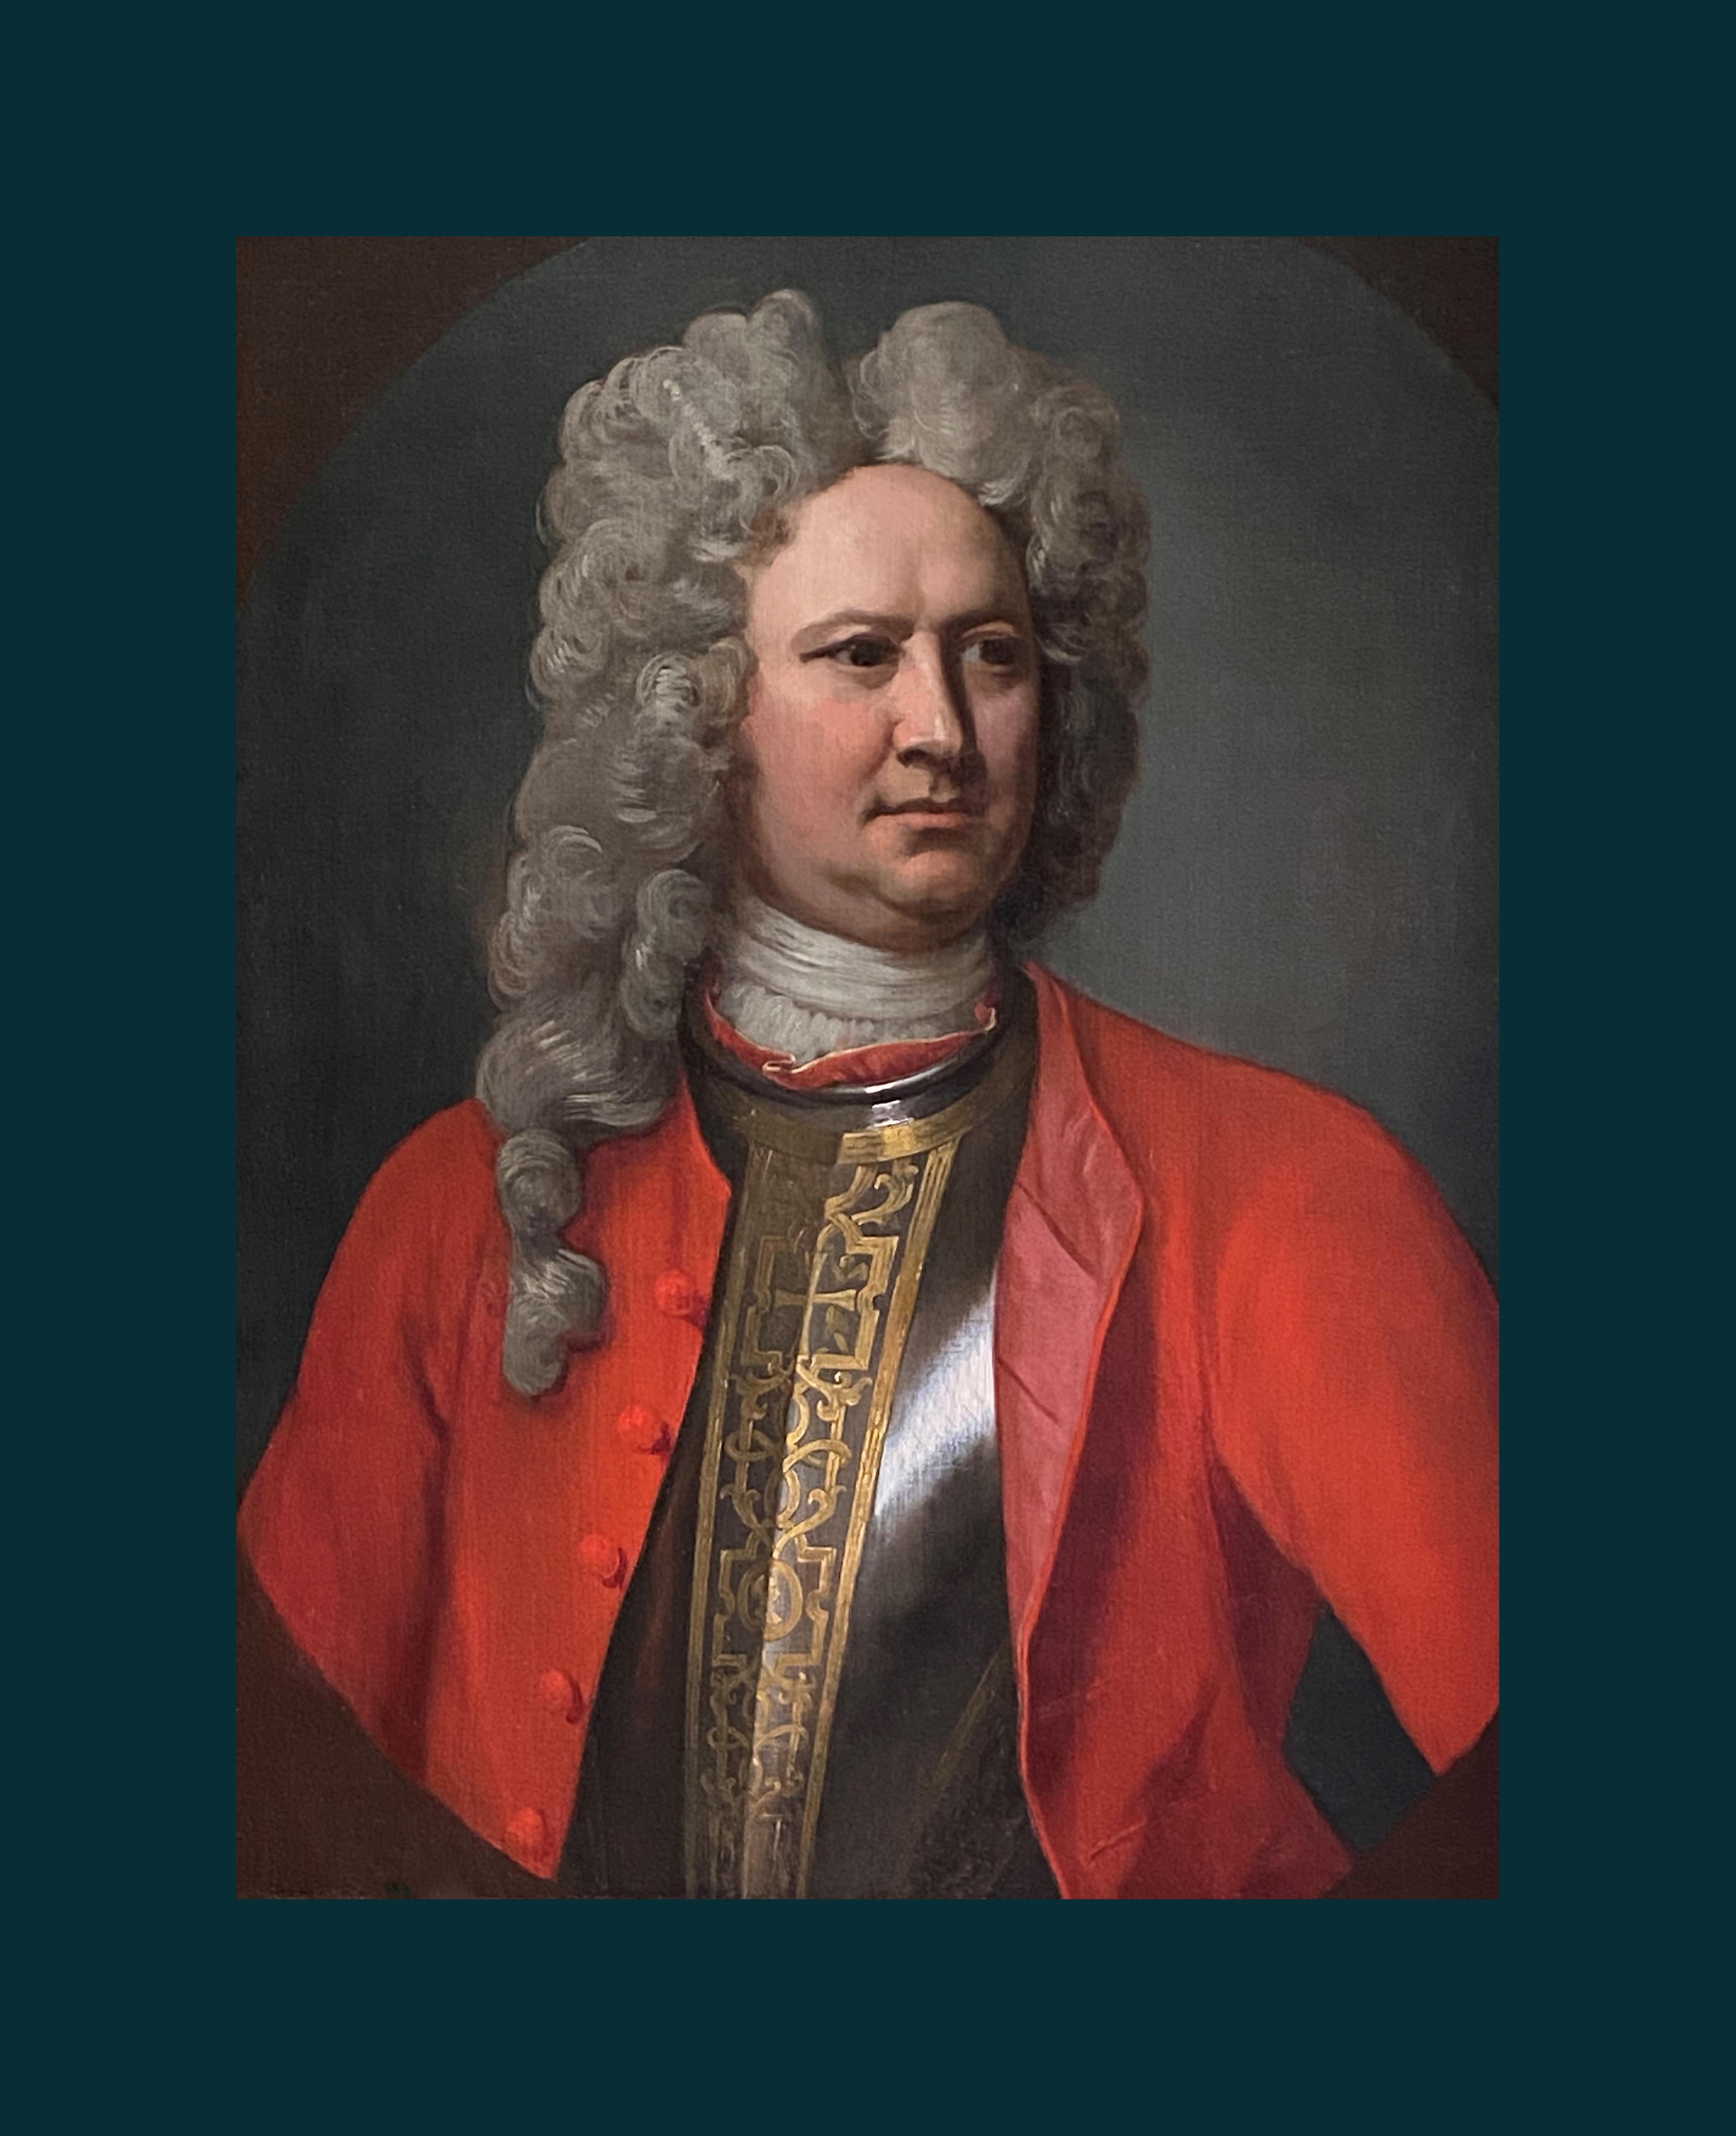 18th CENTURY ENGLISH OIL PORTRAIT OF AN OFFICER  IN A RED COAT - Painting by Unknown